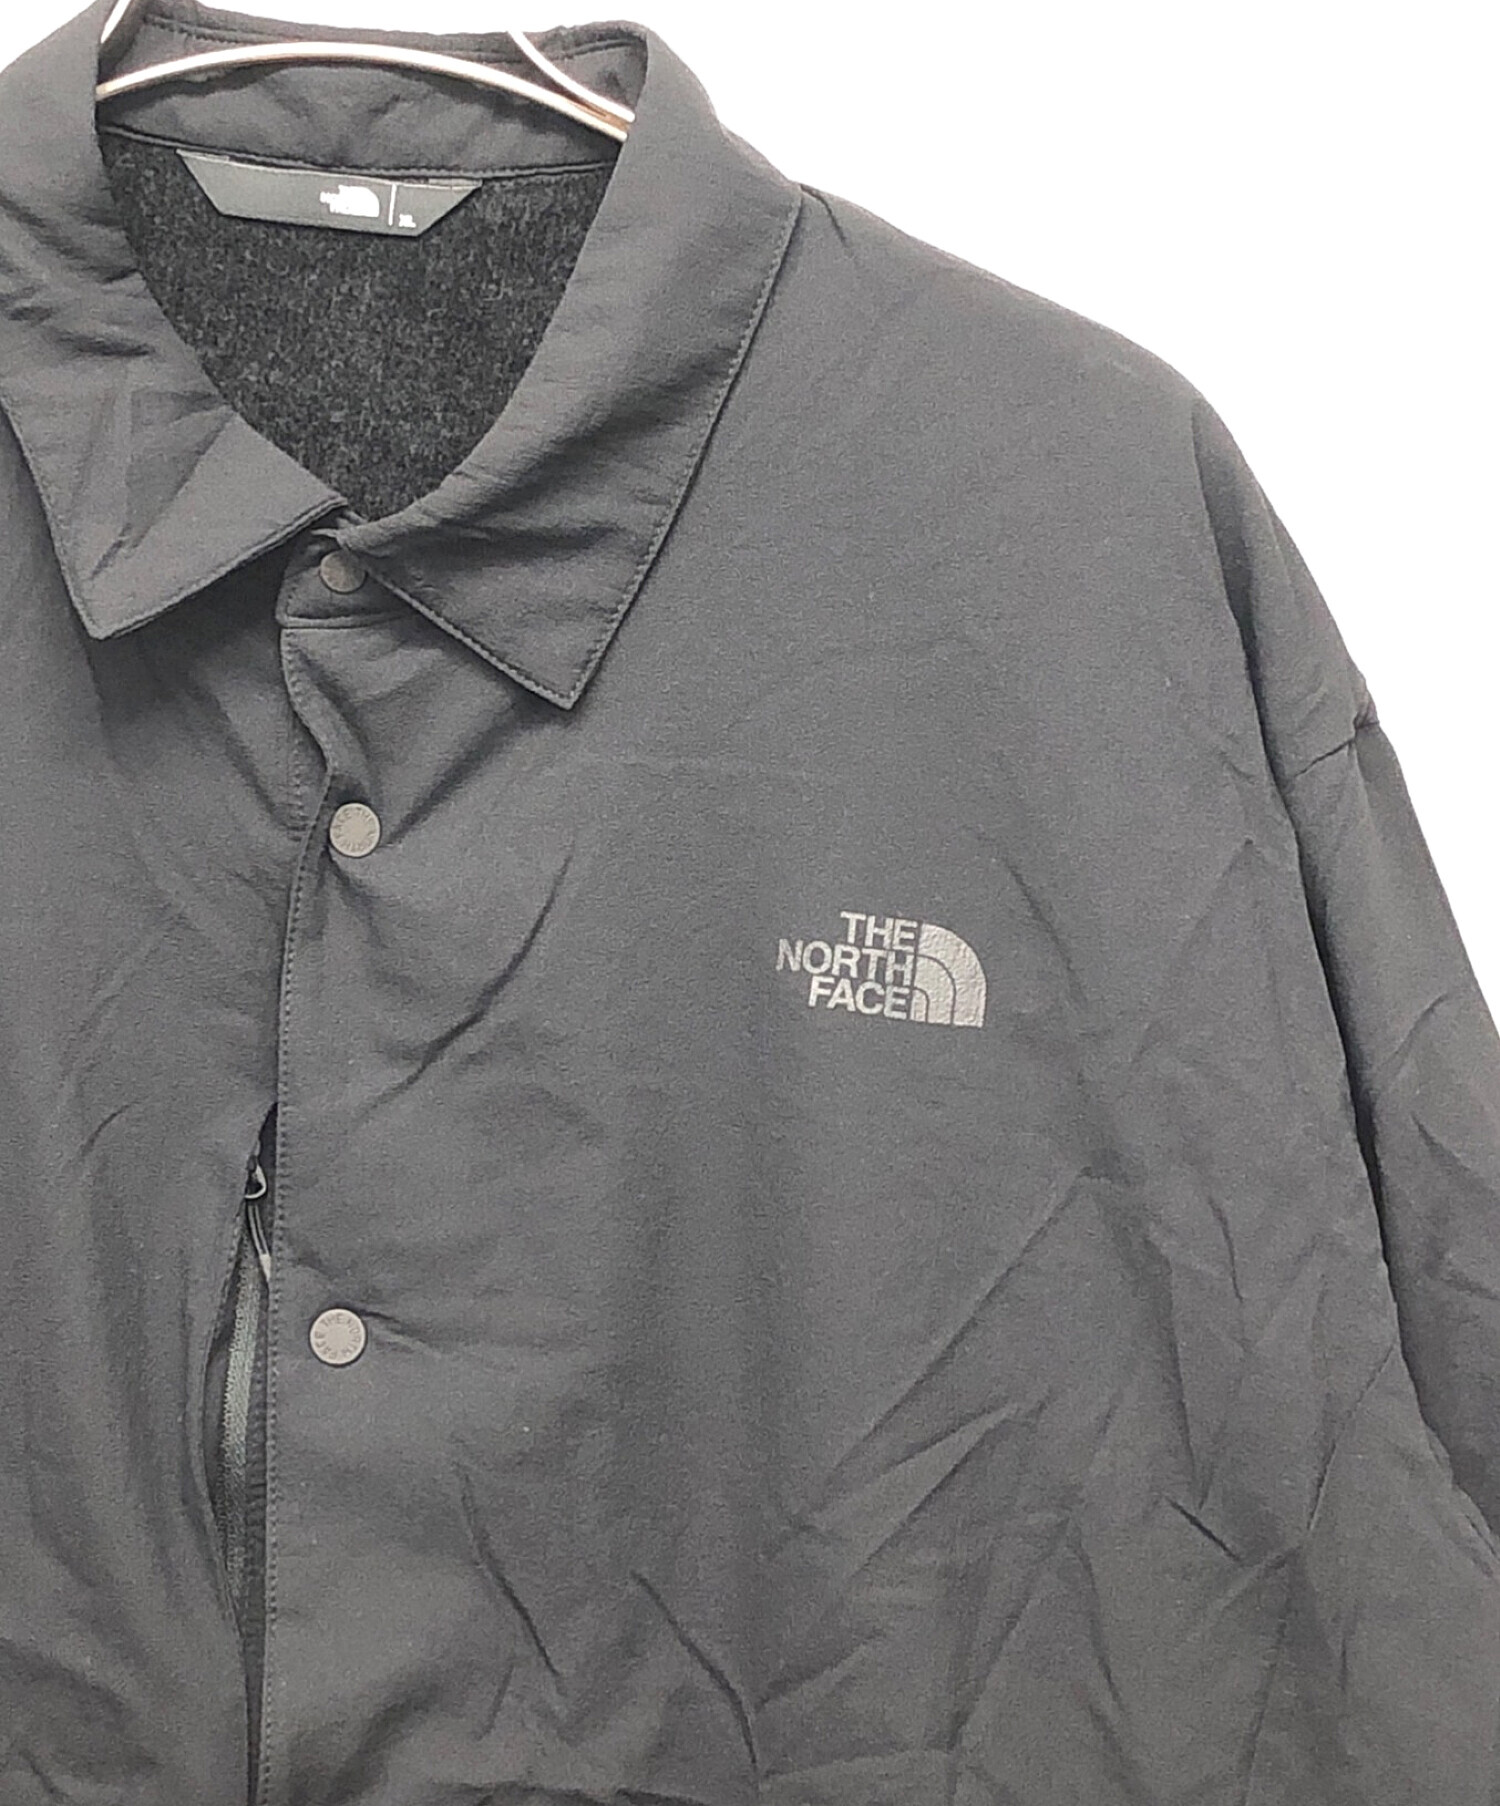 THE NORTH FACE】オクトーバーミッドシャツ 要在庫確認-